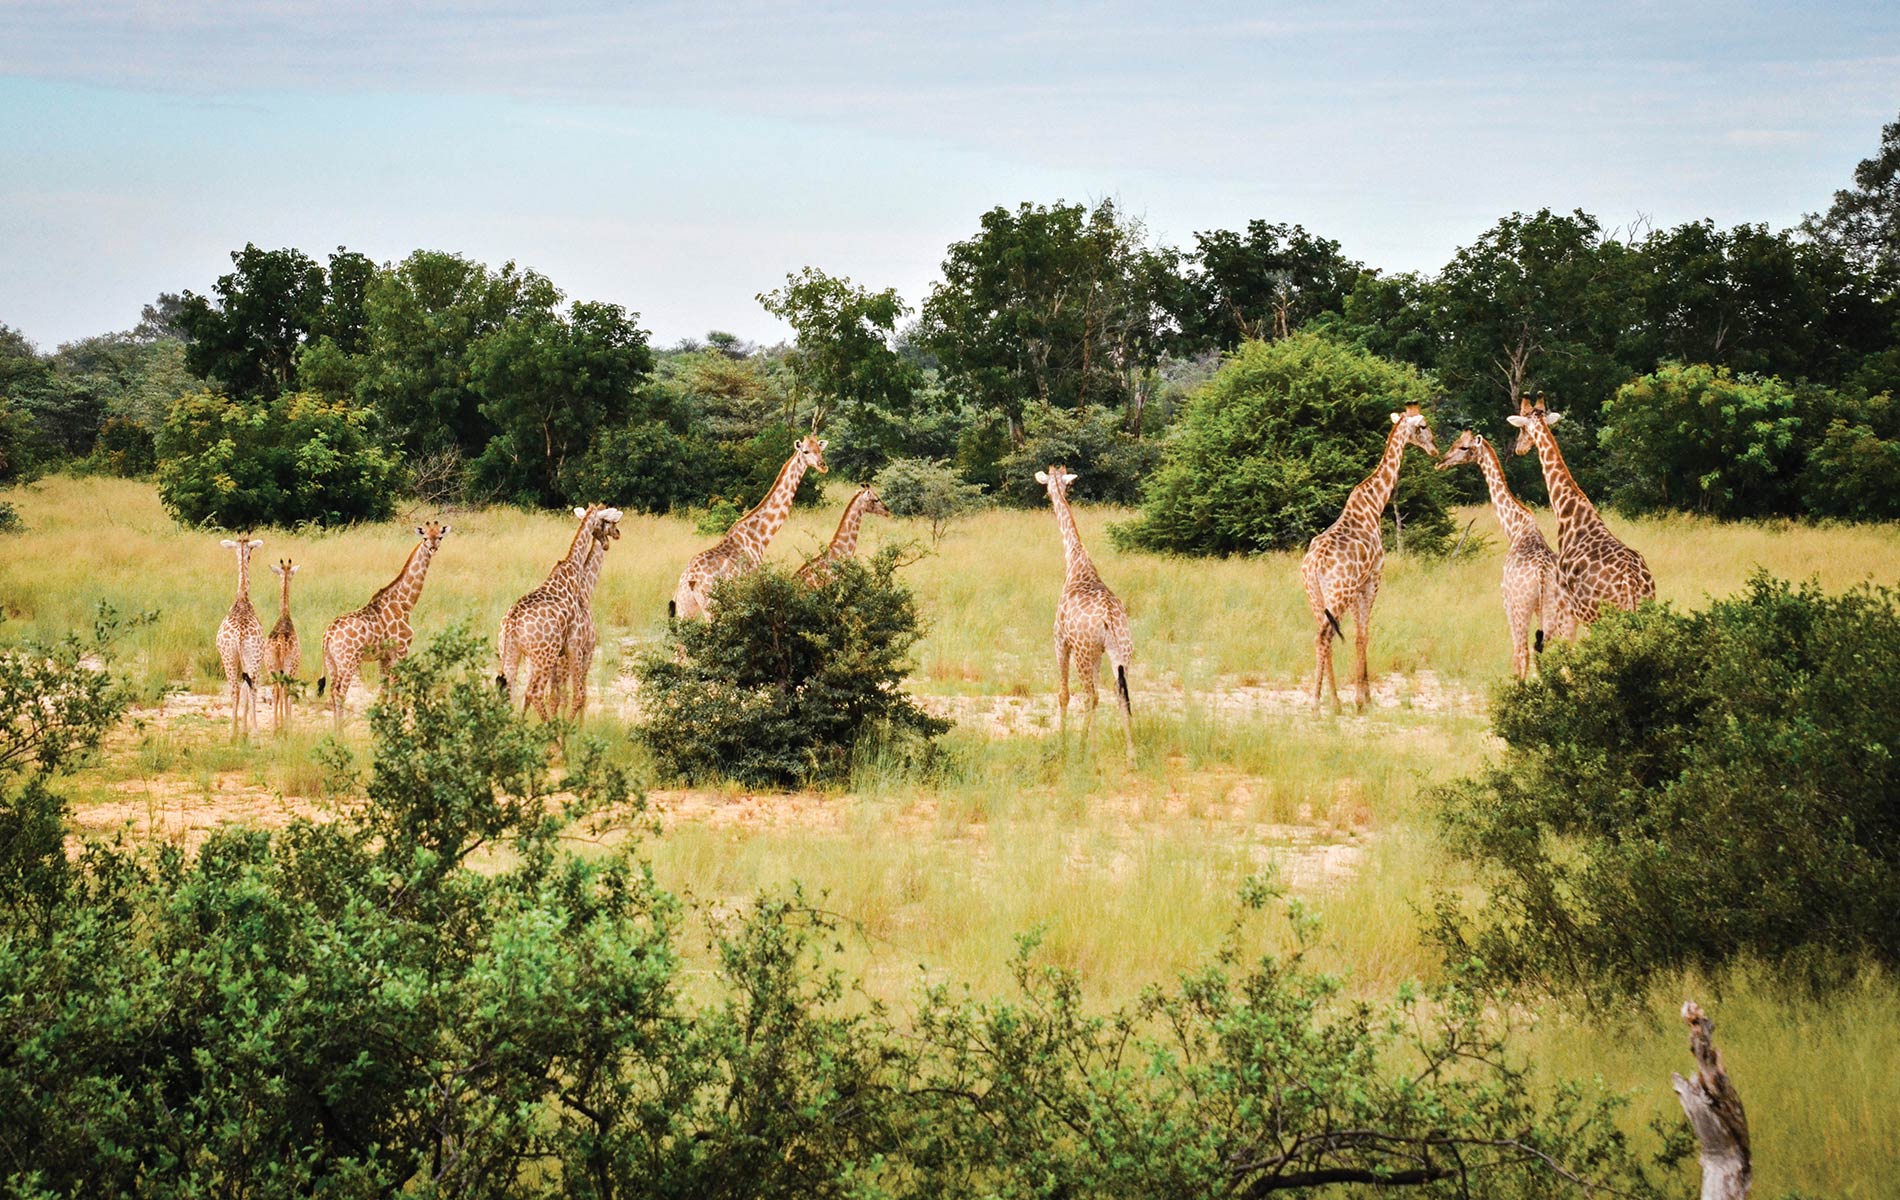 A tower of giraffes heads for their meal of choice—acacia trees—in Namibia’s Zambezi region.